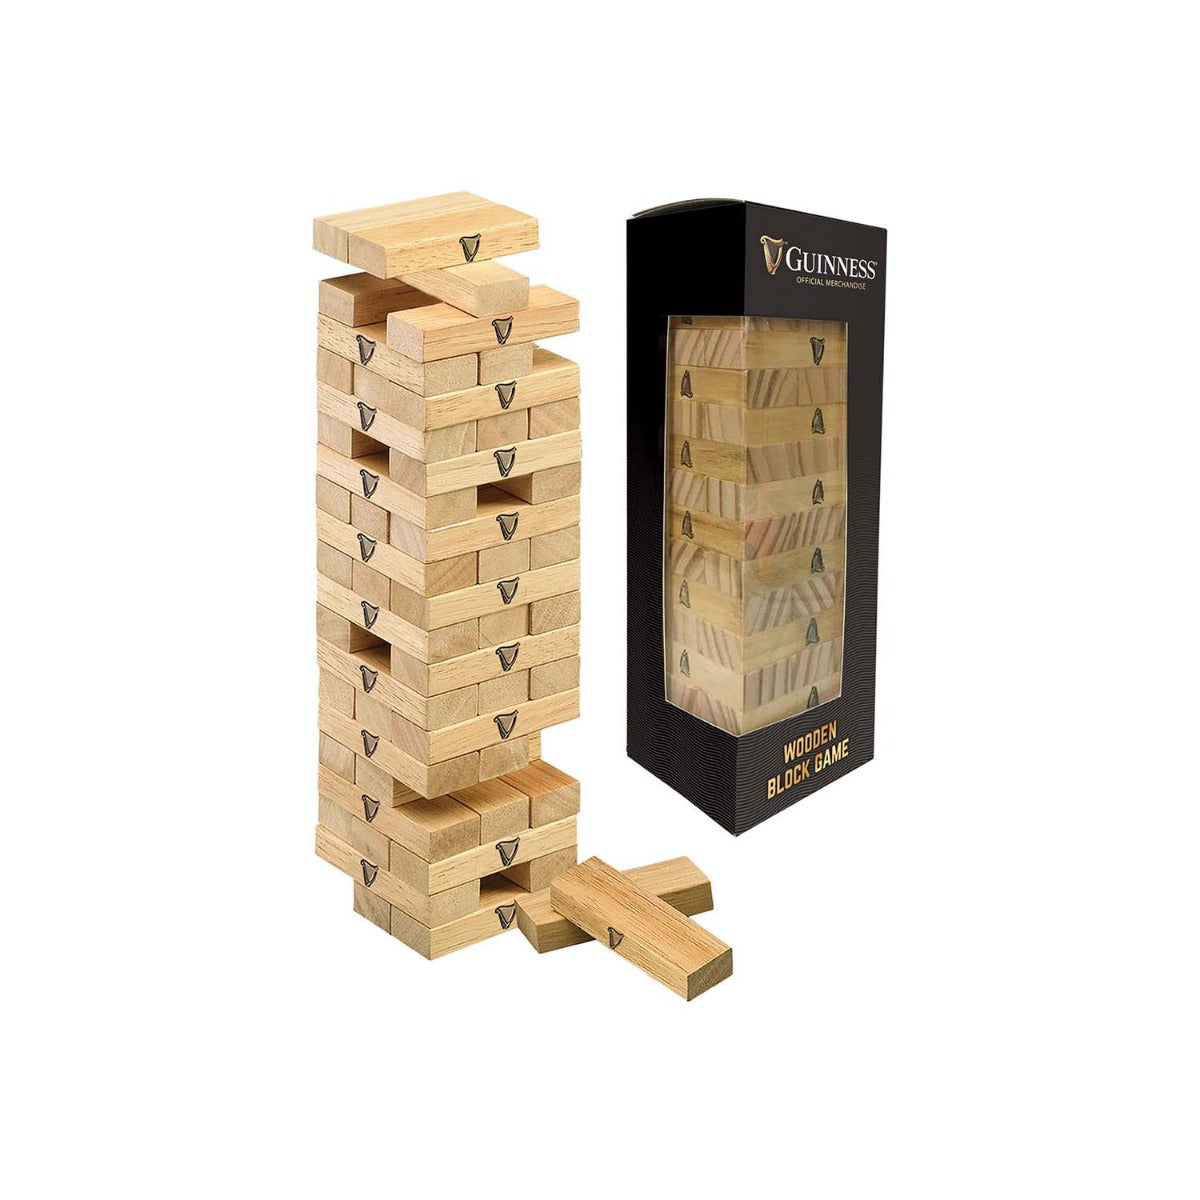 Guinness Wooden Building Block Game